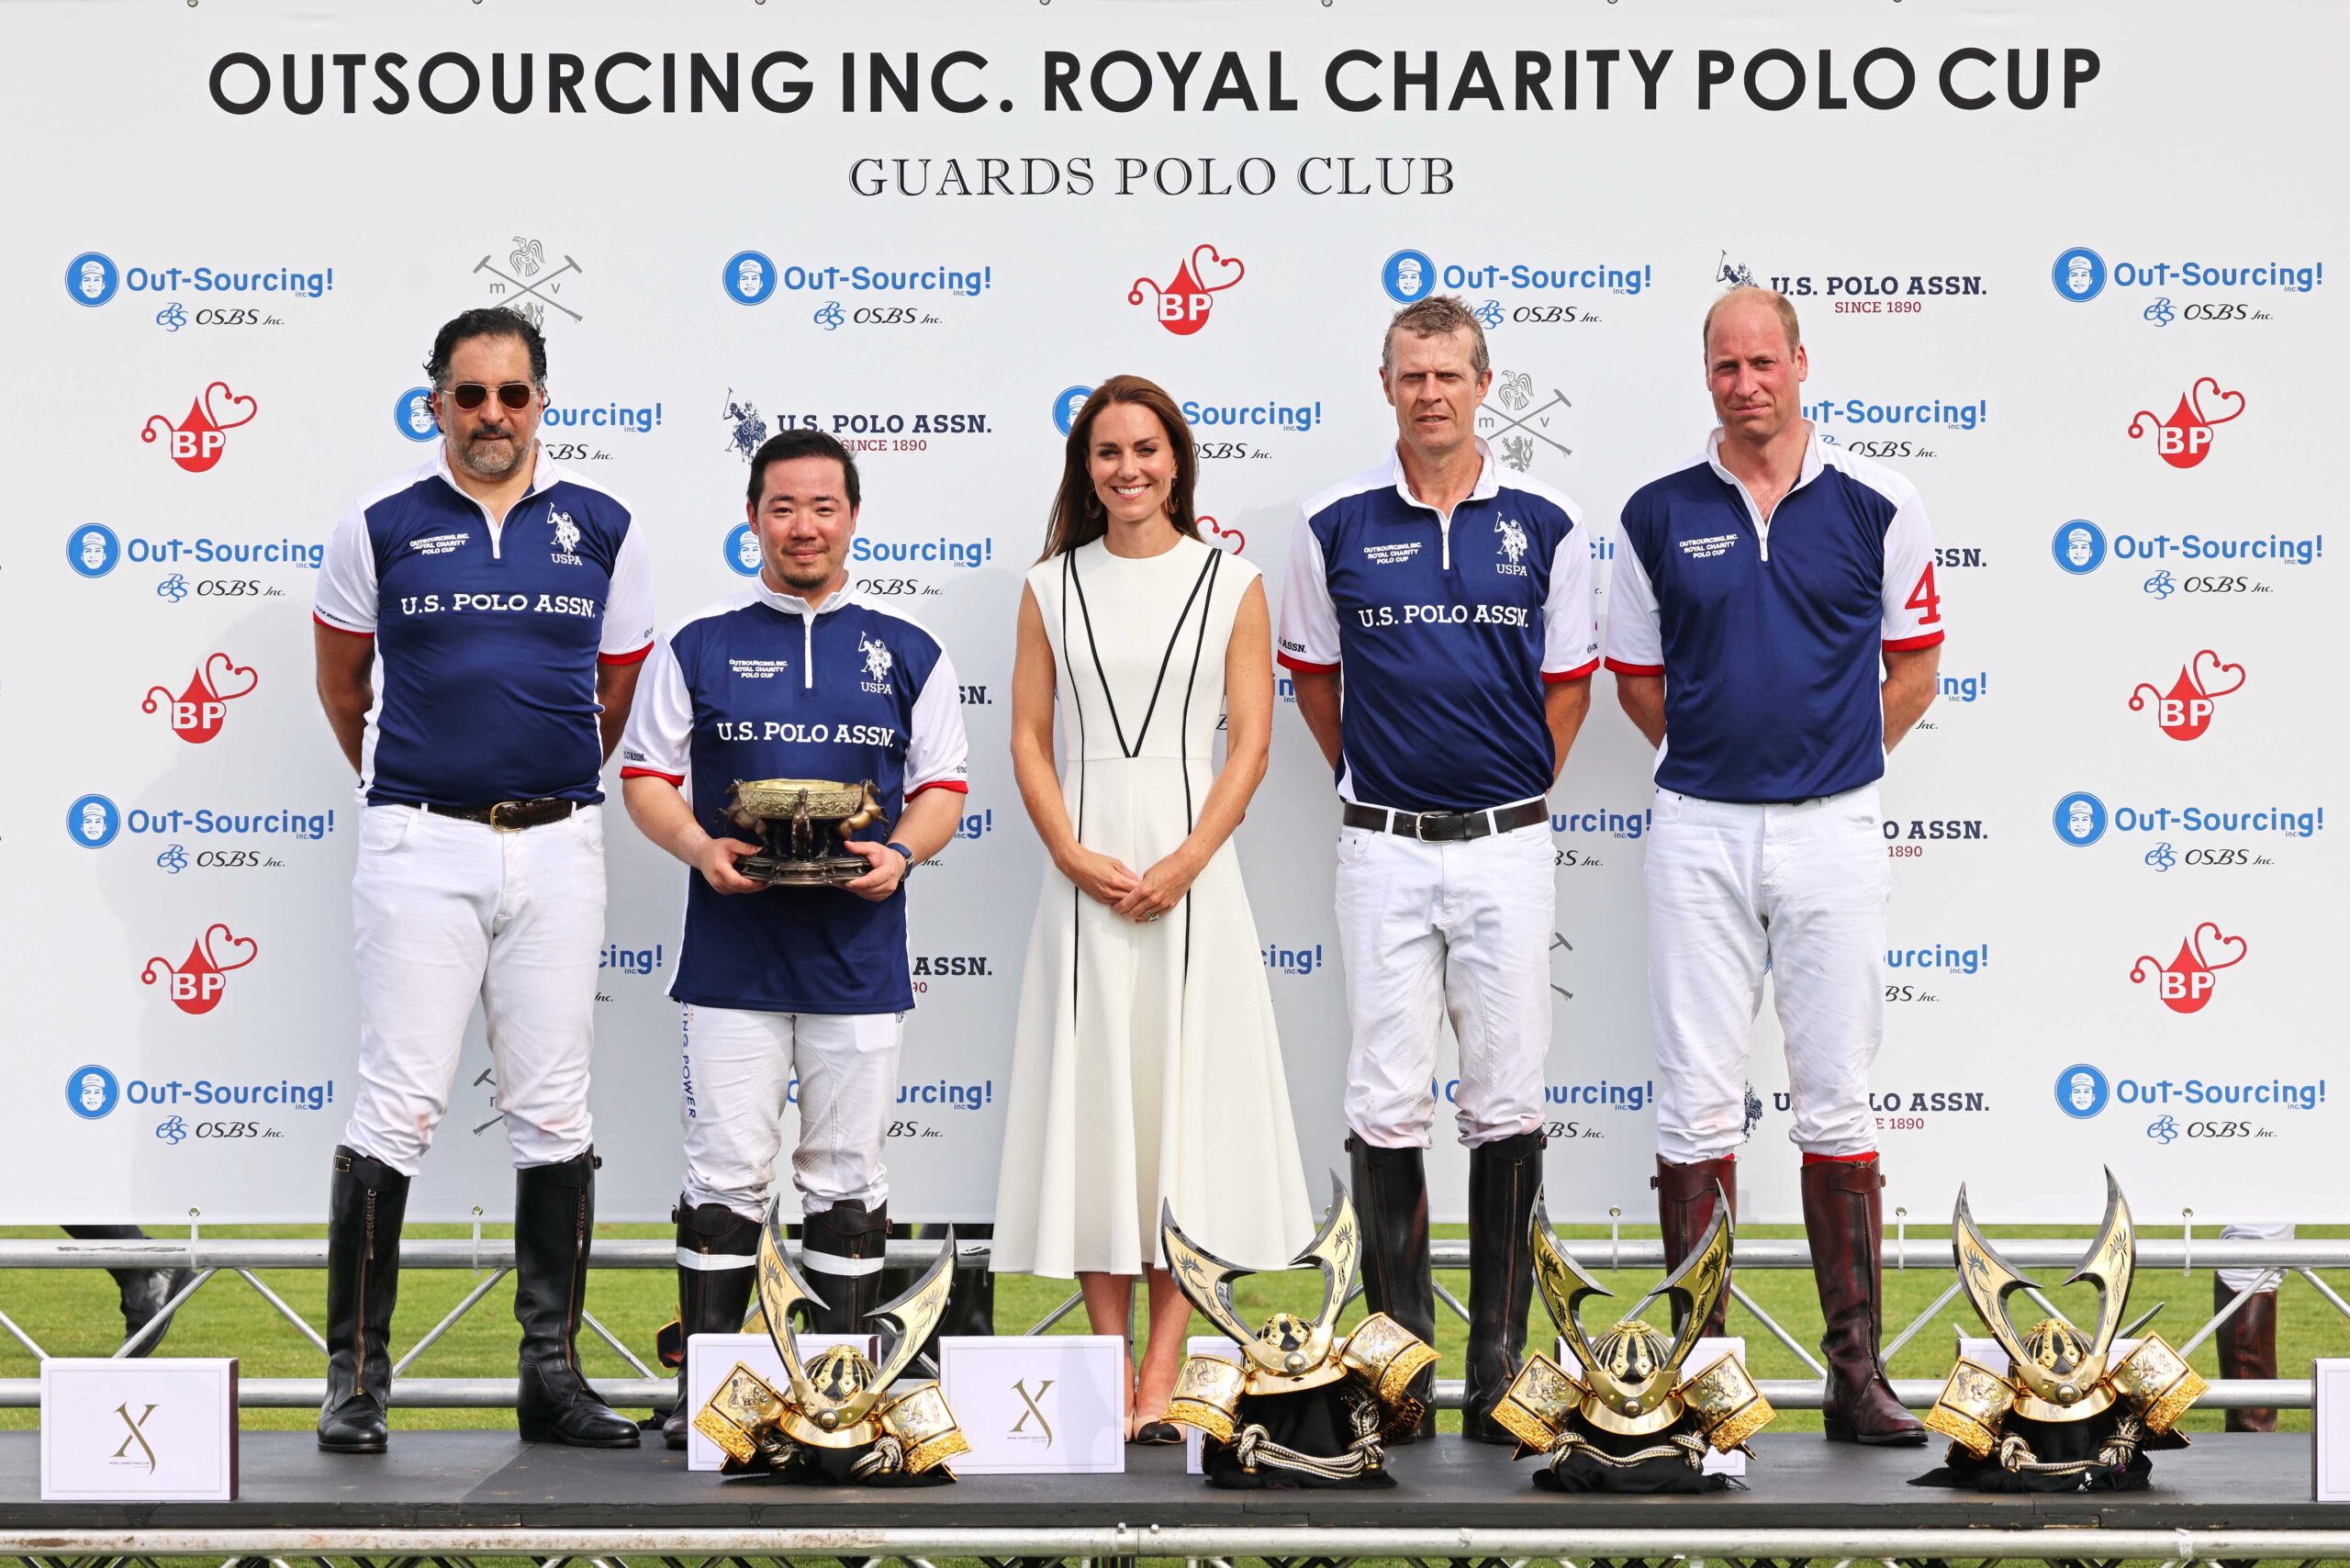 Audi at the royal charity polo cup 2022